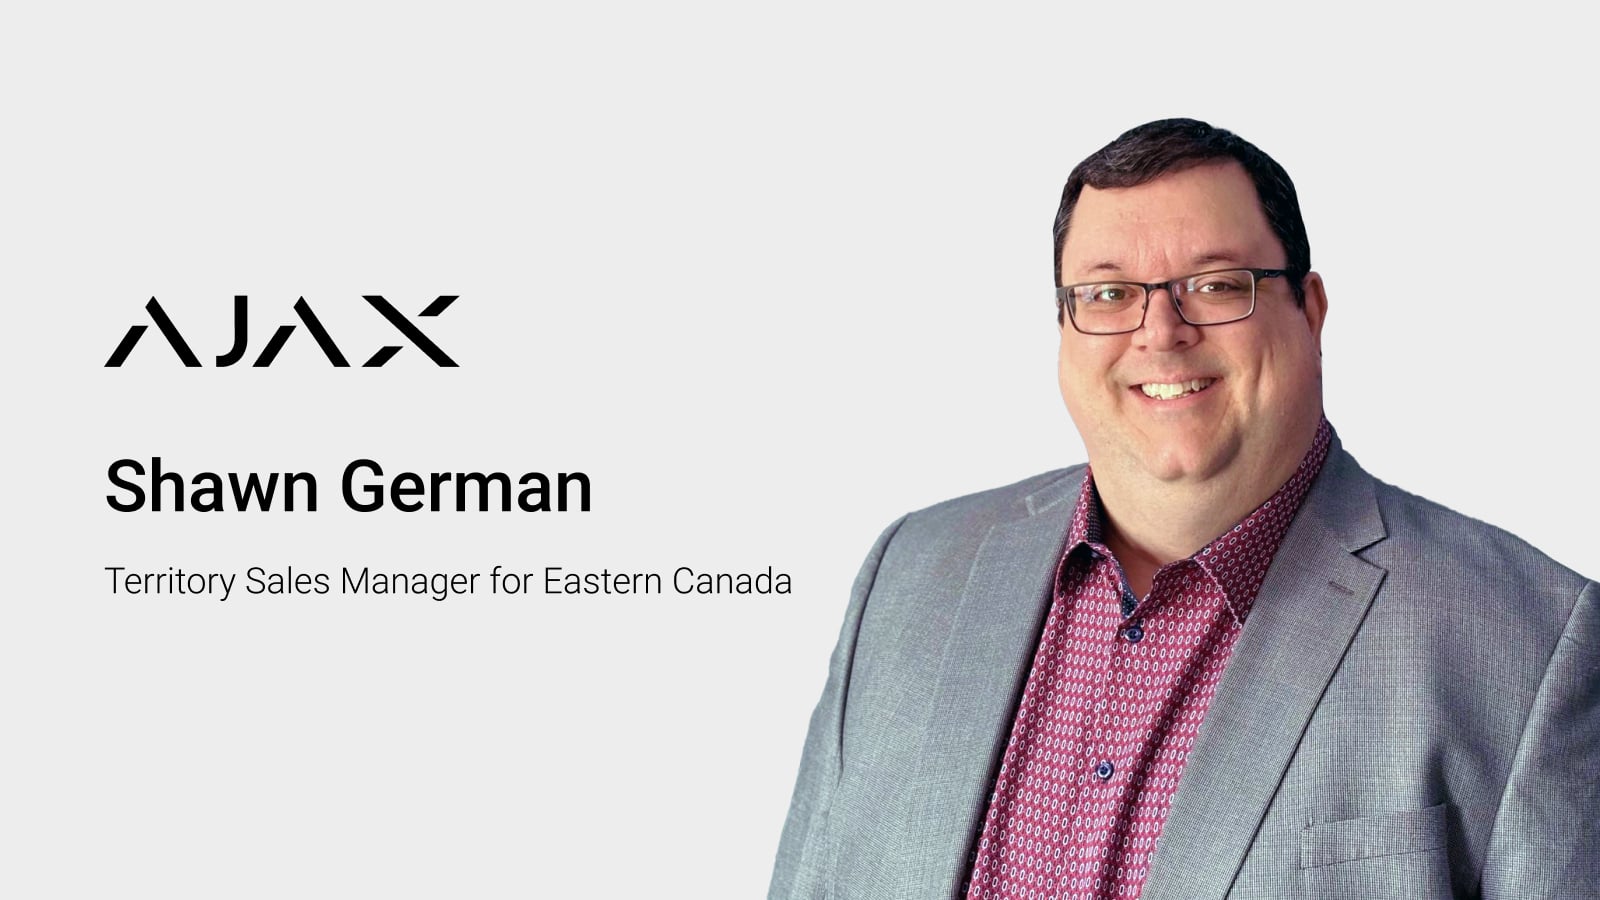 Ajax Systems welcomes Shawn German as Territory Sales Manager for Eastern Canada